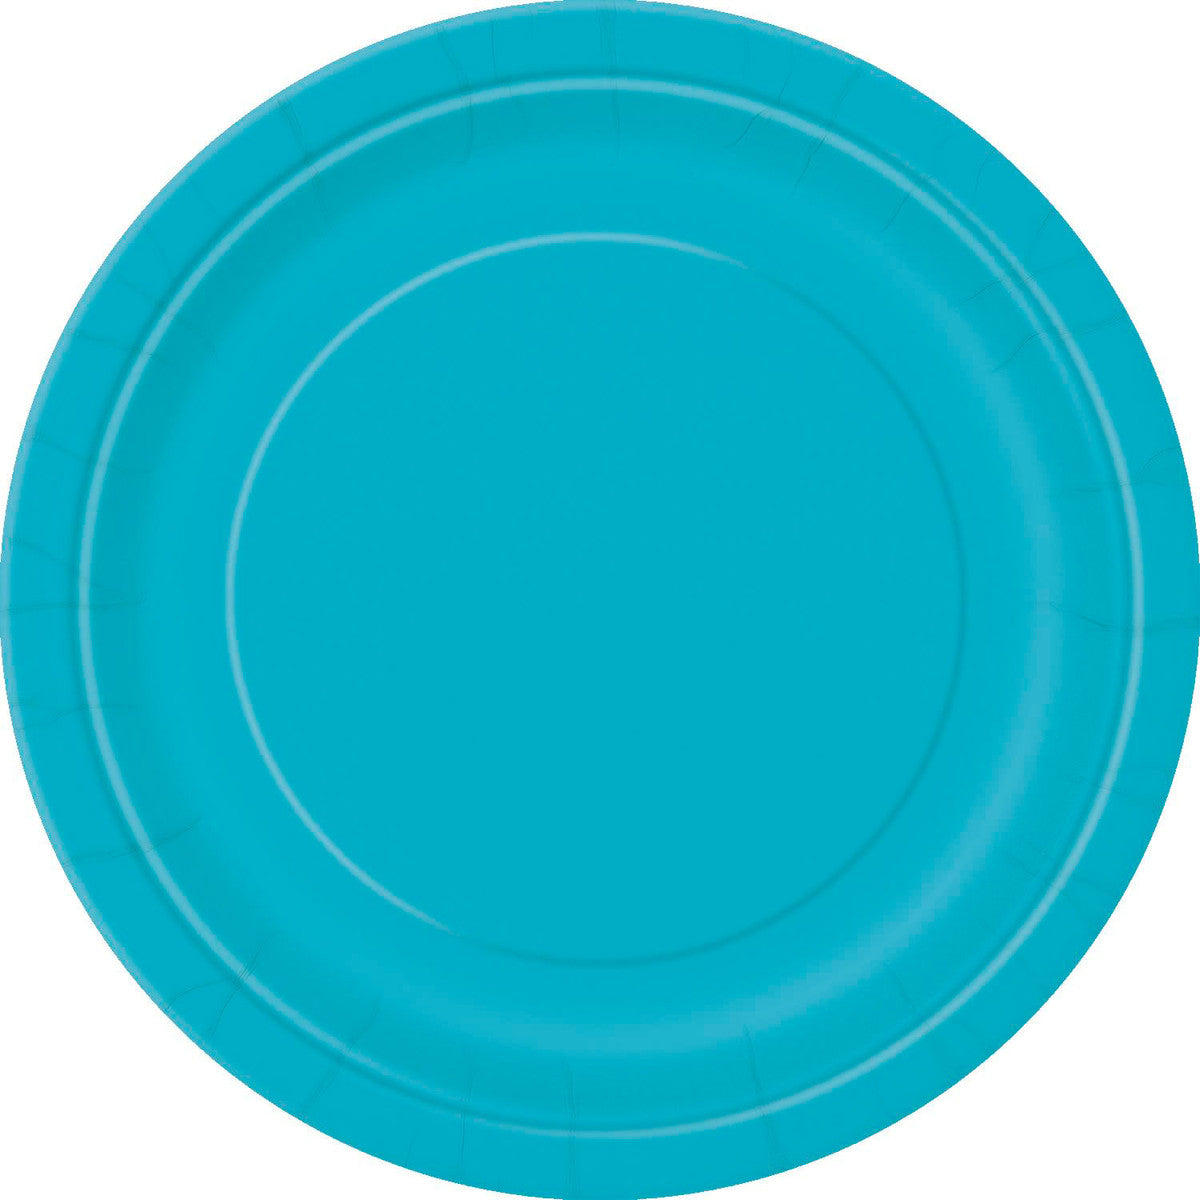 Caribbean Teal Paper Plates - 23cm 8 Pack 1 Piece - Dollars and Sense